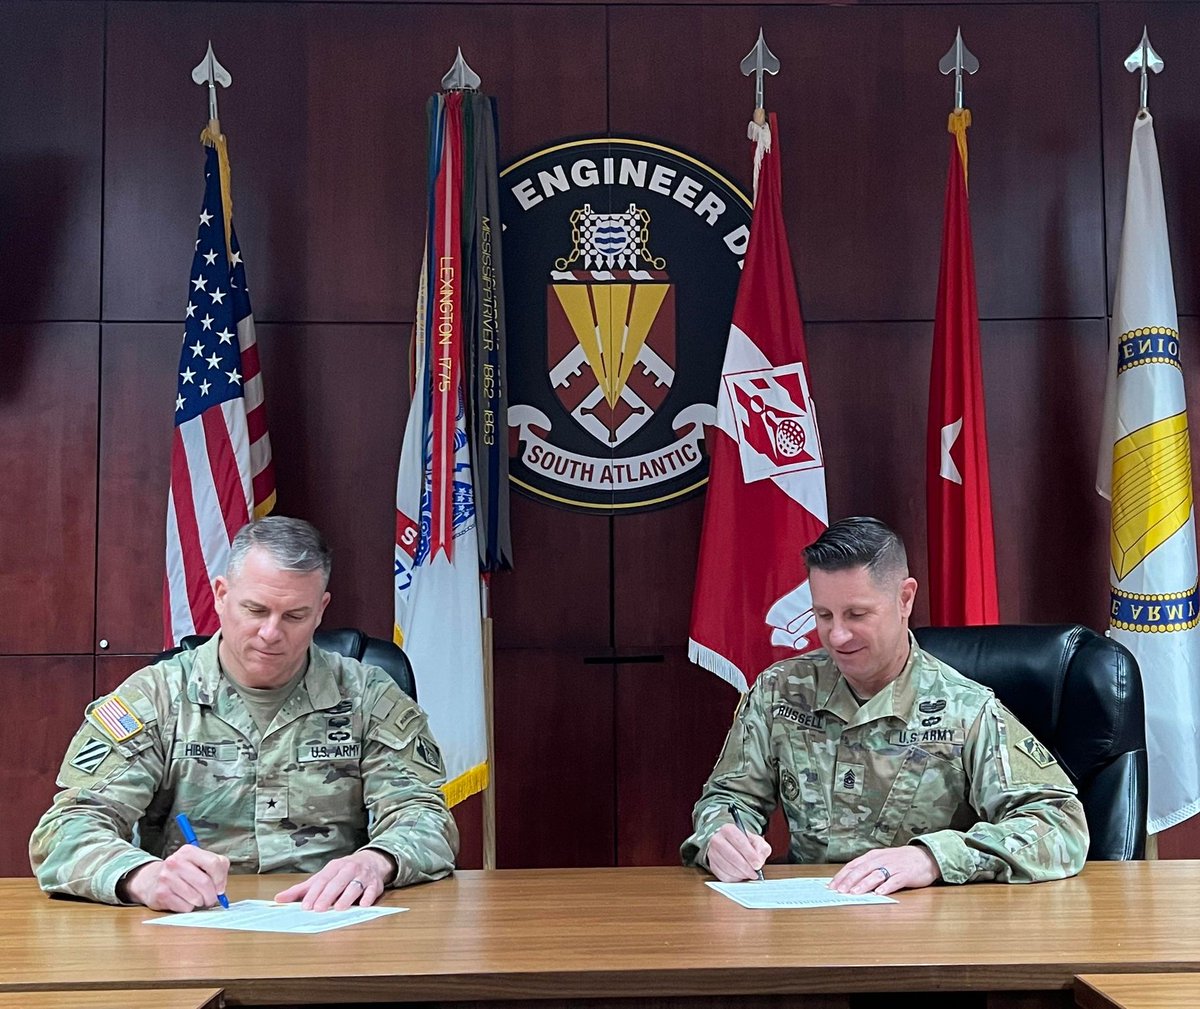 Brig. Gen. Daniel Hibner and Cmd. Sgt. Maj. Rodney Russell signed a Sexual Assault Awareness and Prevention Month proclamation that declares the South Atlantic Division's dedication to fostering a culture of respect, safety, and accountability. @USACEHQ #SAAPM #ChangeThroughUnity